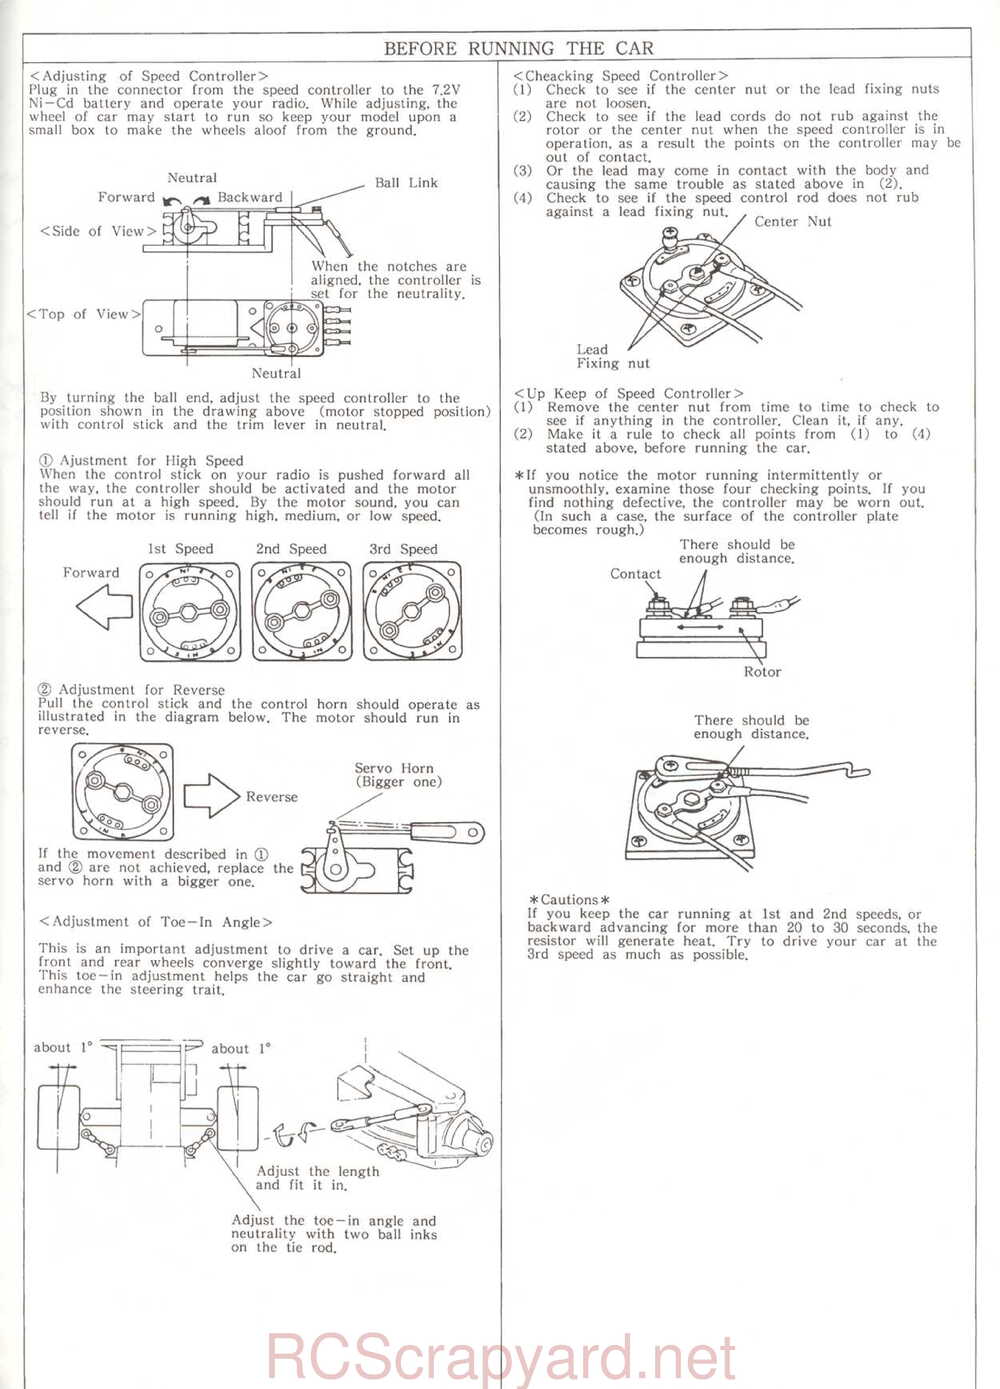 Kyosho - 3108 - The-Boss - Manual - Page 17